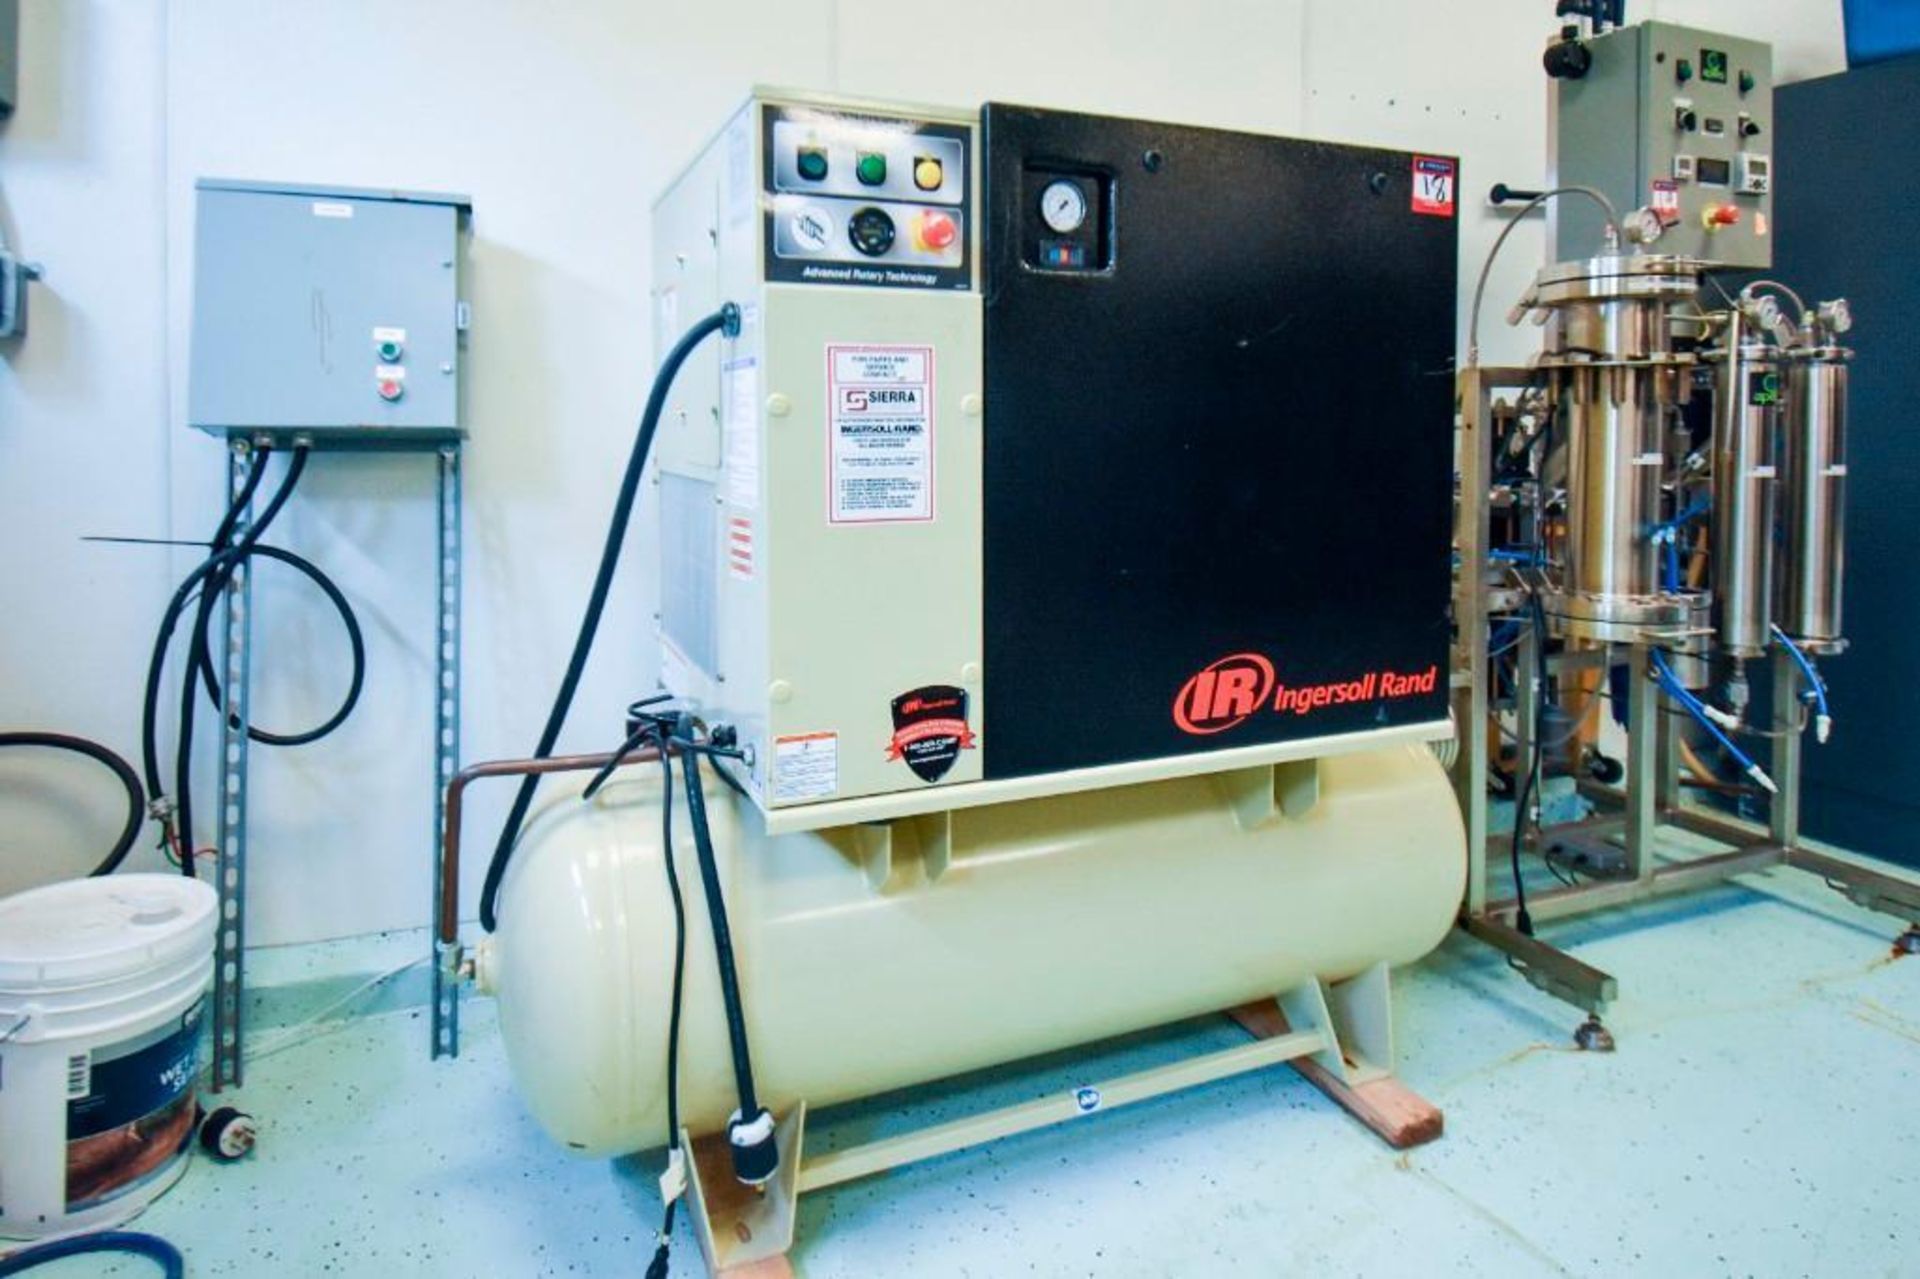 Ingersoll Rand Air Compressor - Image 3 of 7